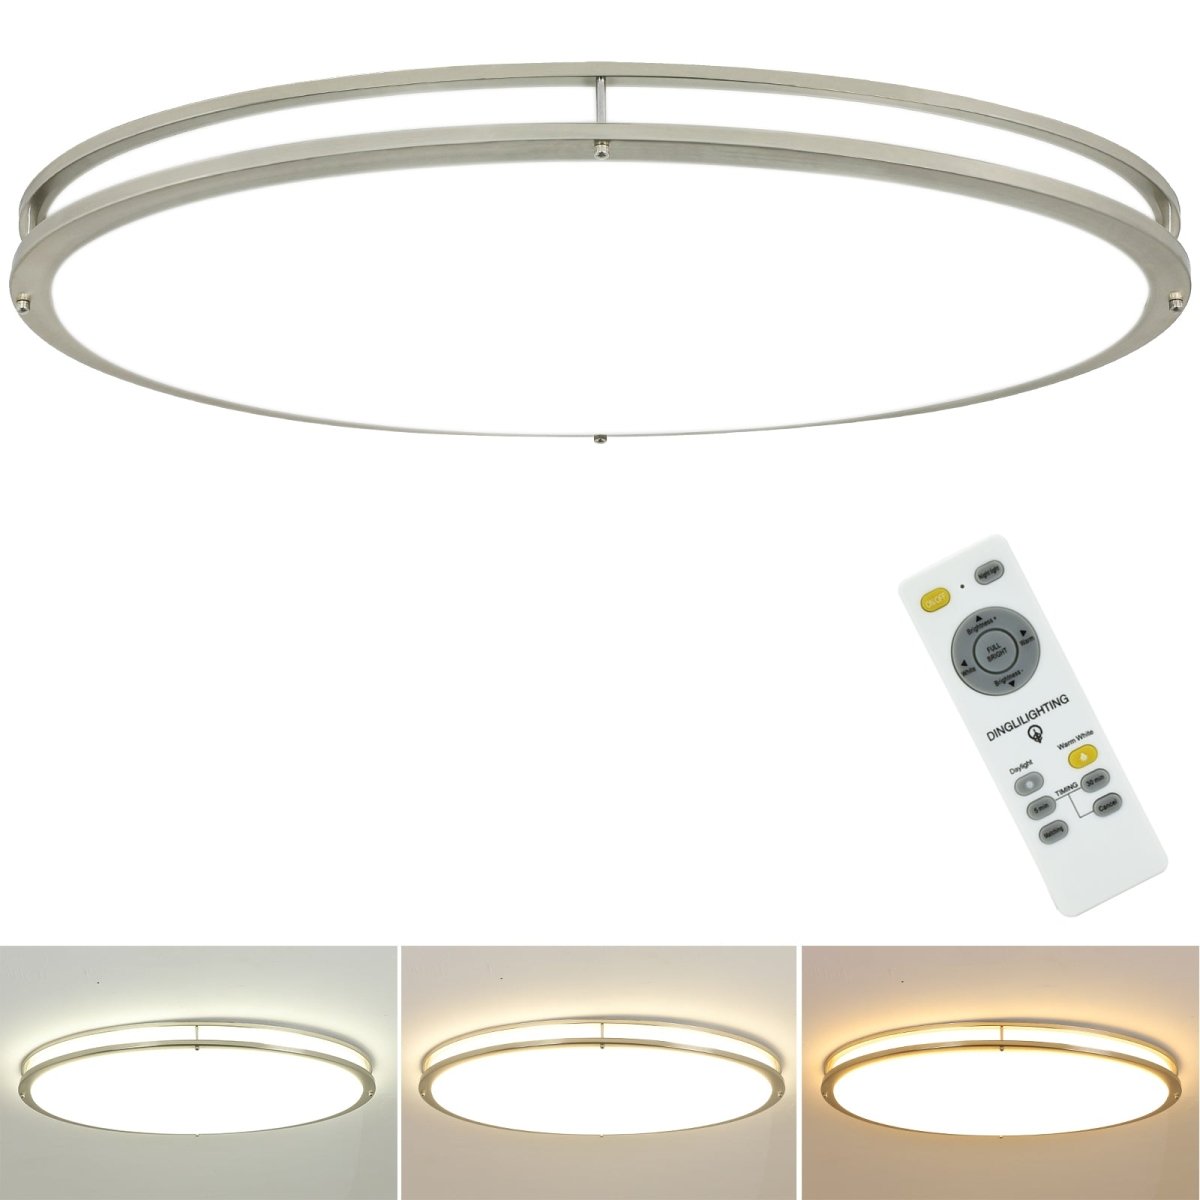 DLLT 32In Oval LED Ceiling Light Fixture, 65W Dimmable LED Flush Mount Ceiling Light with Remote, 3000K/4000K/5000K Adjustable, Brush Nickel Finish for Bedroom/Living Room/Dining Room - WS-FPC39-65C-D 1 | DEPULEY